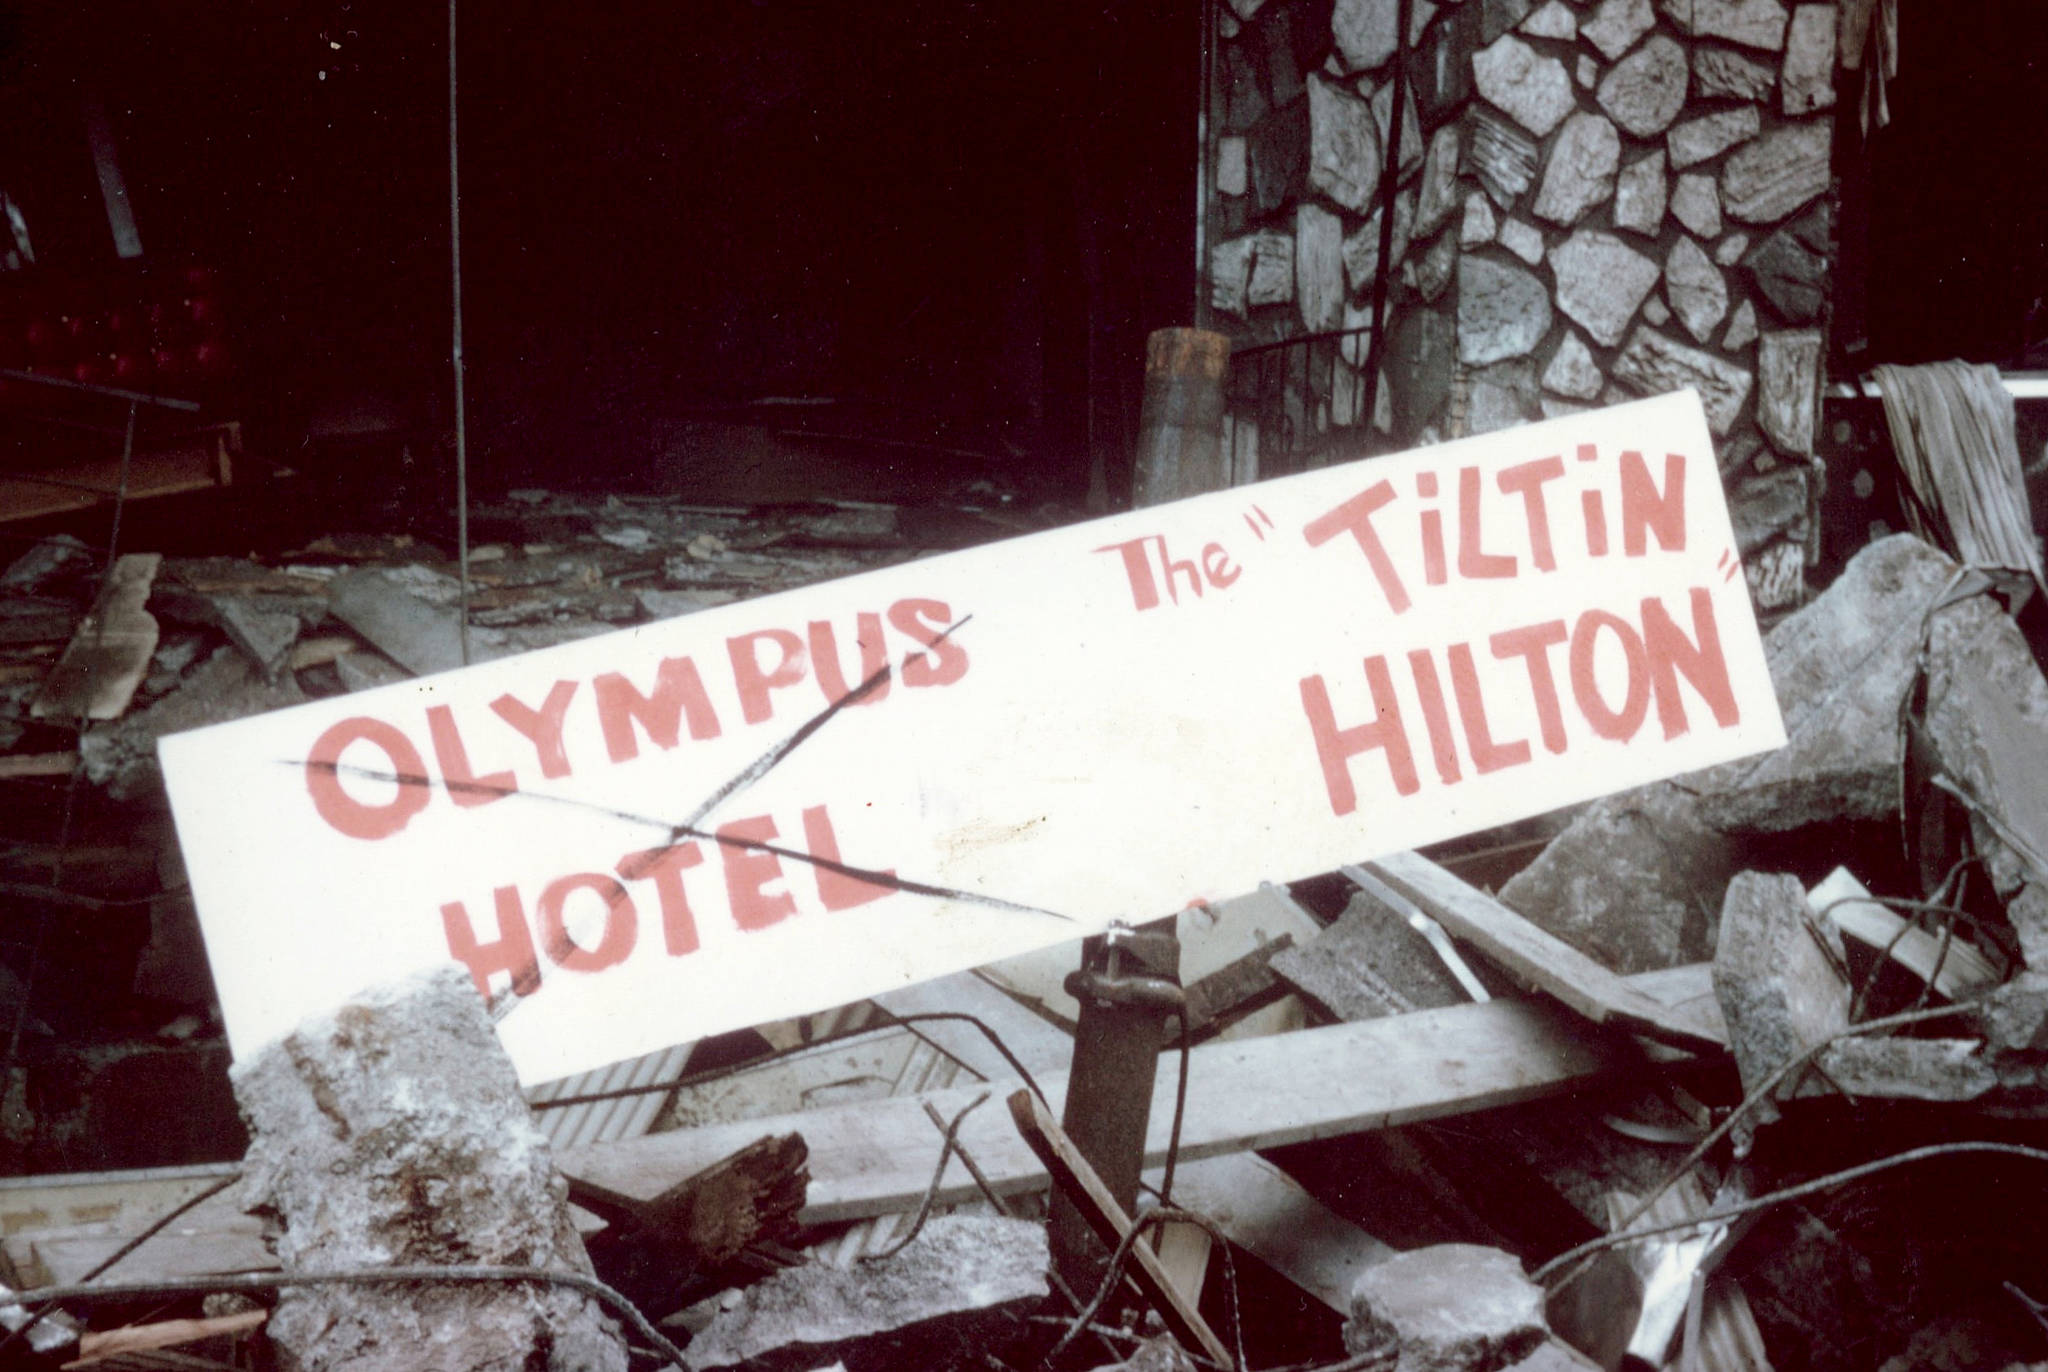 Daughter of Olympus Hotel owners recalls night of Port Angeles gas explosion 47 years ago